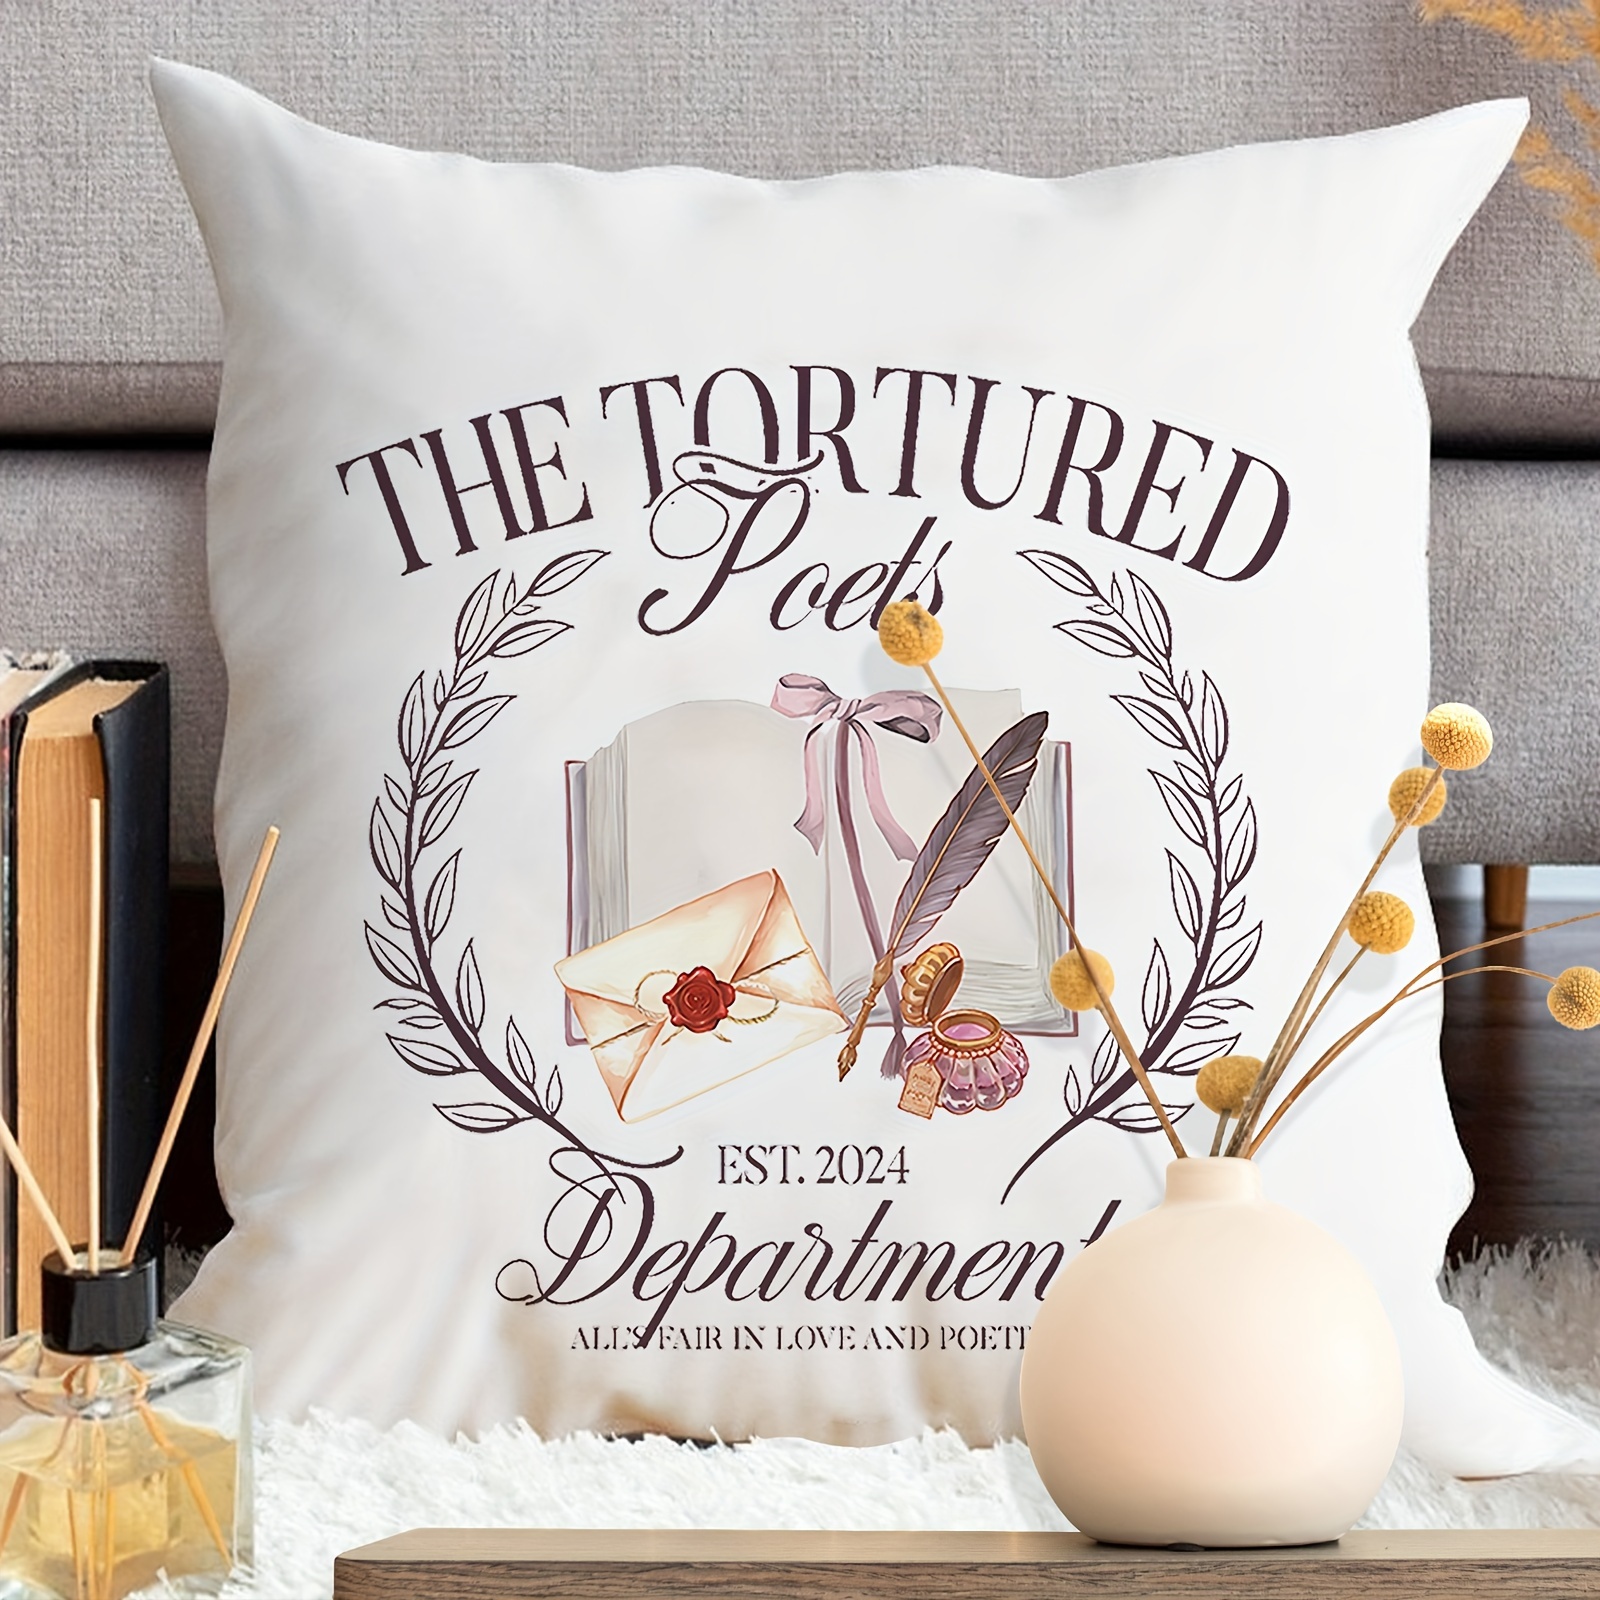 

Velvet Tortured Poets Department Throw Pillow Cover - Hypoallergenic, Zip Closure, Machine Washable - Perfect Gift For Her